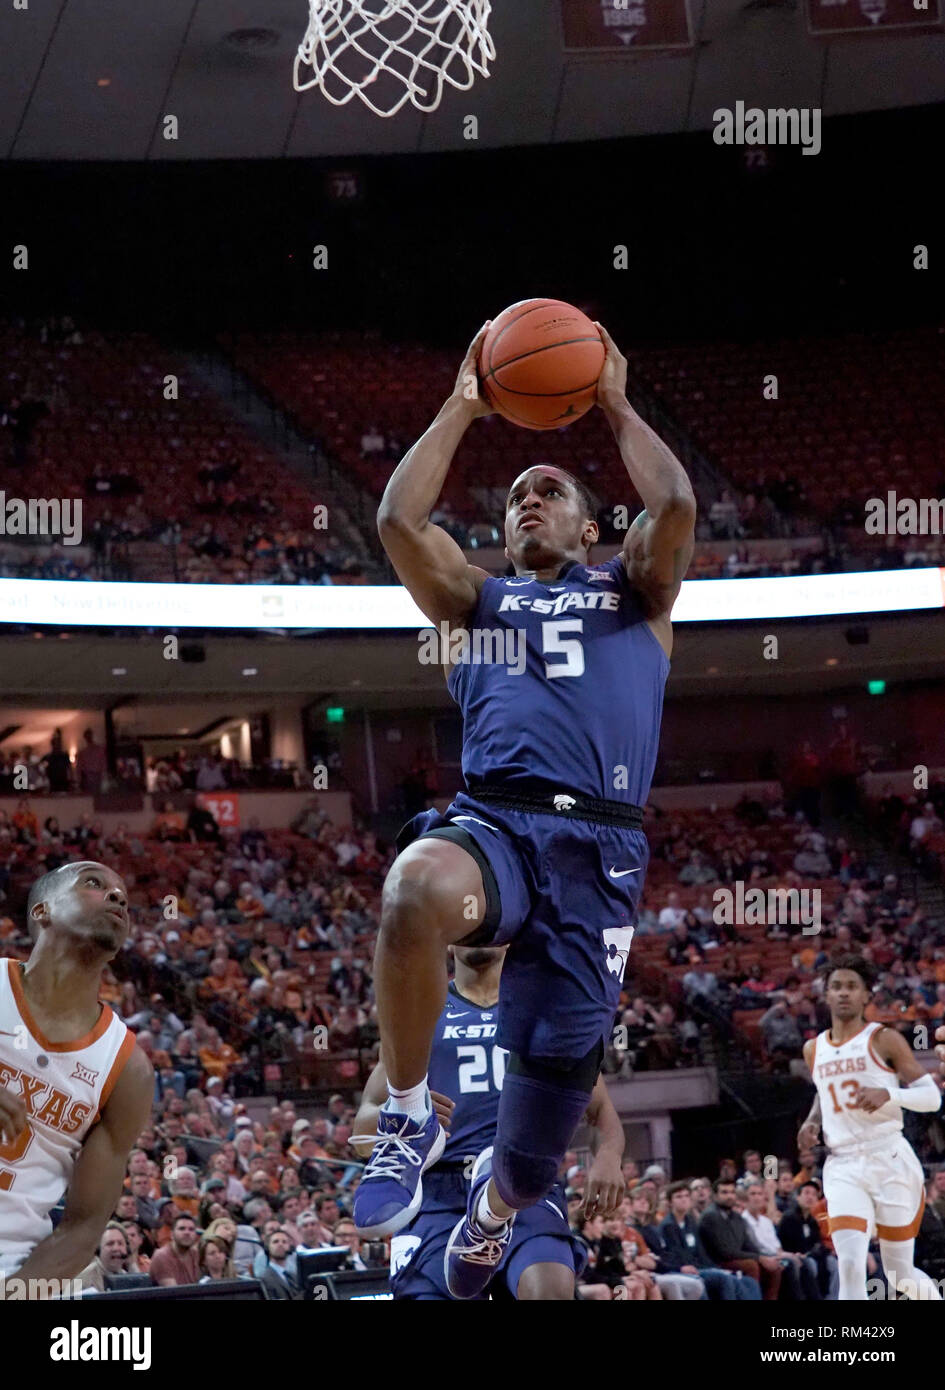 Feb 12, 2019. Barry Brown Jr #5 of the Kansas State Wildcats in action vs the Texas Longhorns at the Frank Erwin Center in Austin Texas. K-State defeats Texas 71-64.Robert Backman/Cal Sport Media. Stock Photo